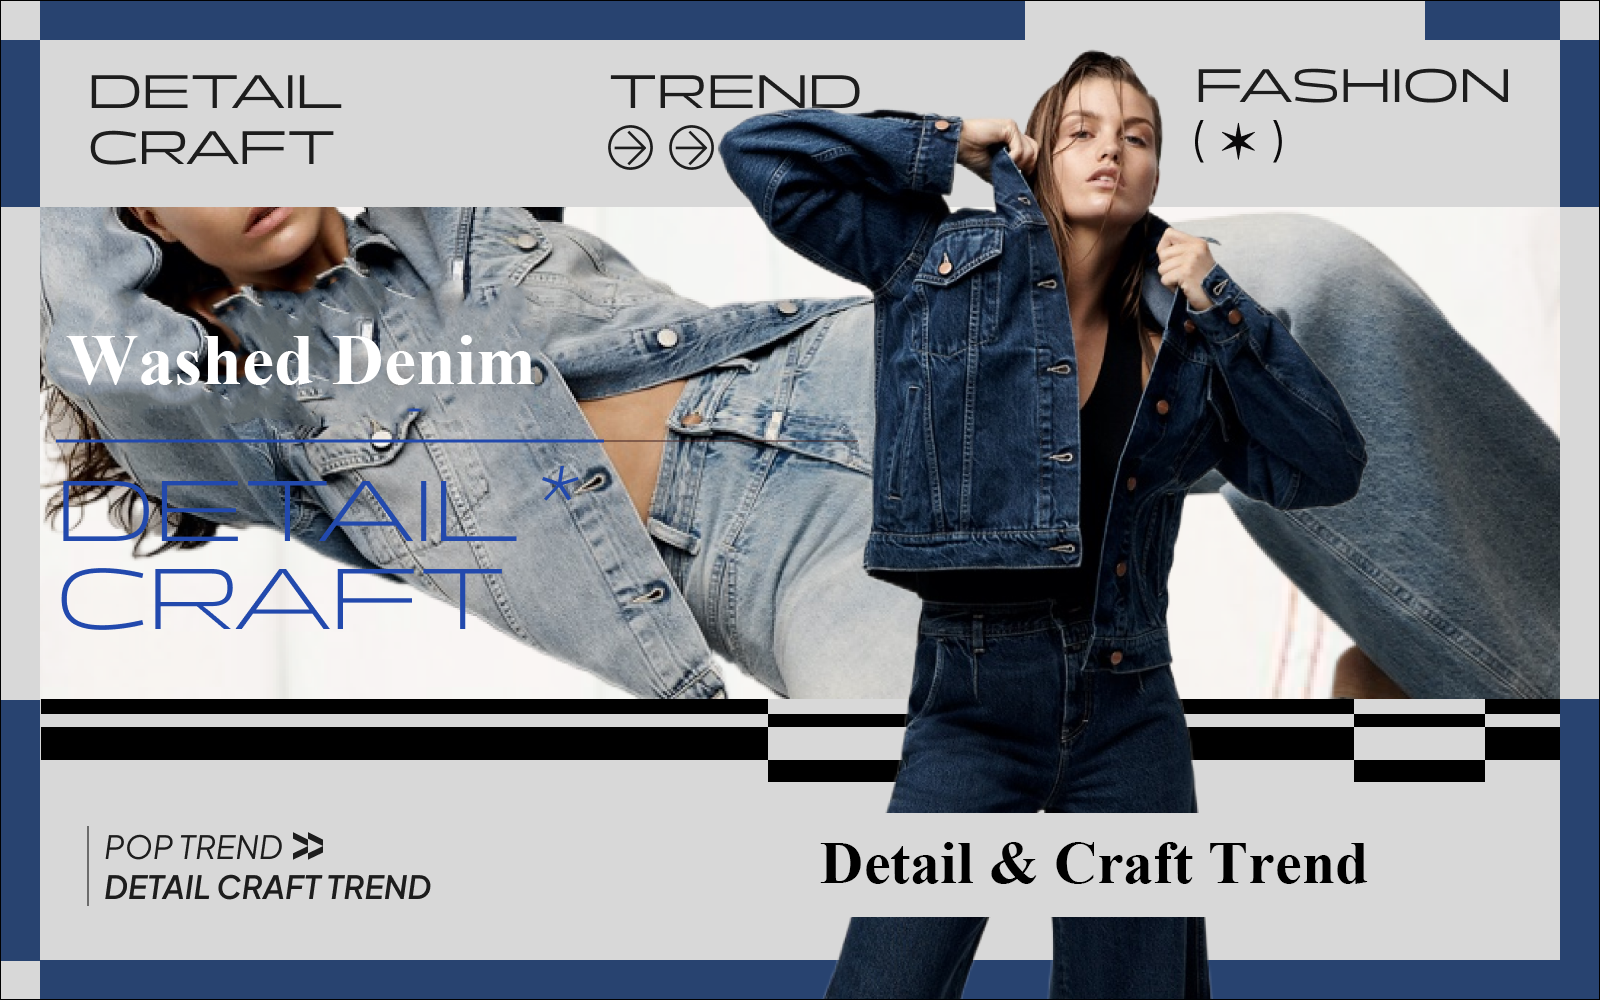 Classic Fusion -- The Craft Trend for Denim Wash